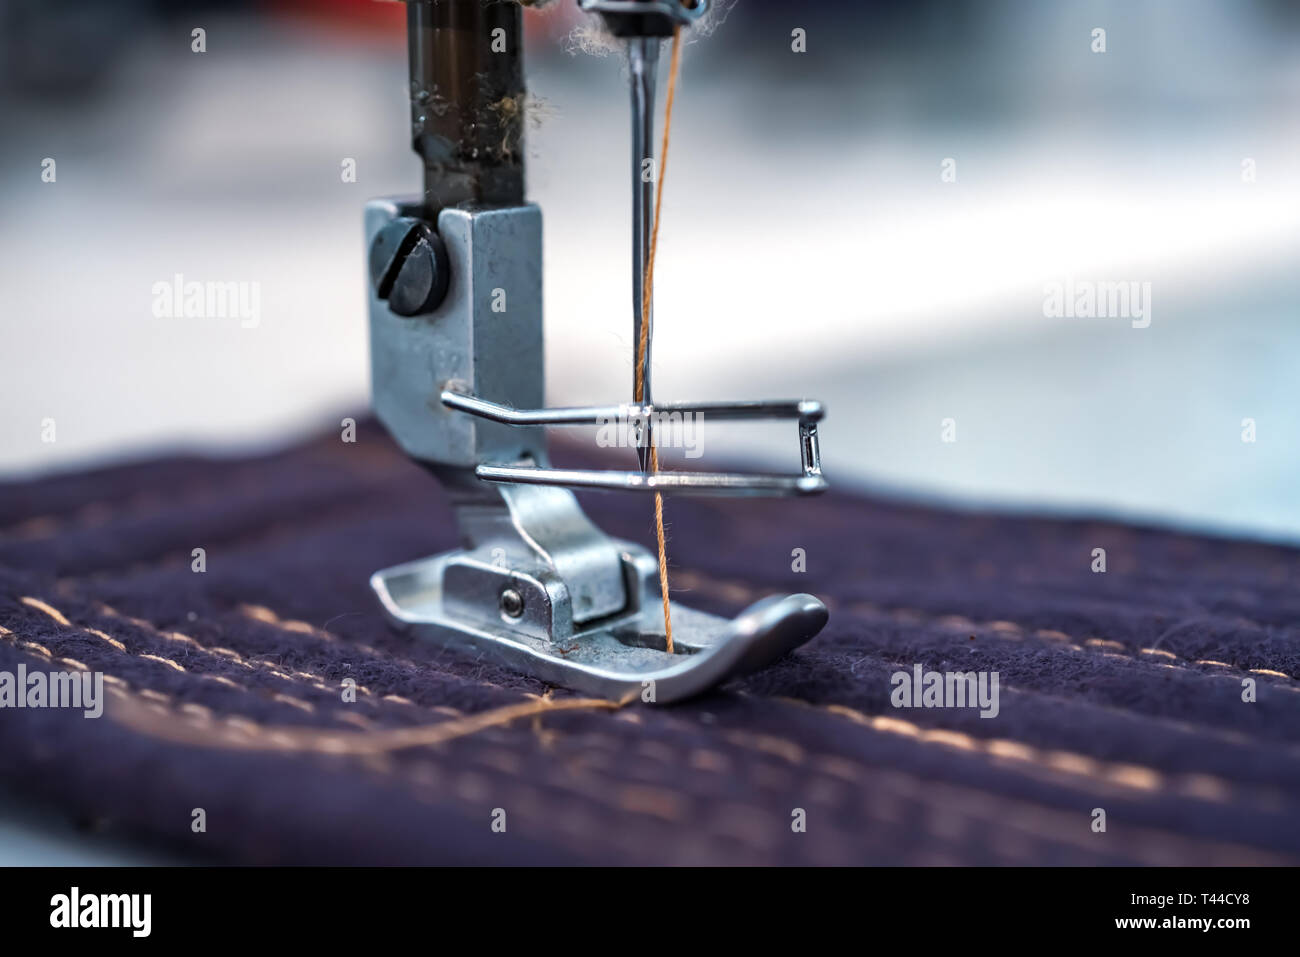 Professional Sewing Machine Close Up Modern Textile Industry Stock Photo Alamy